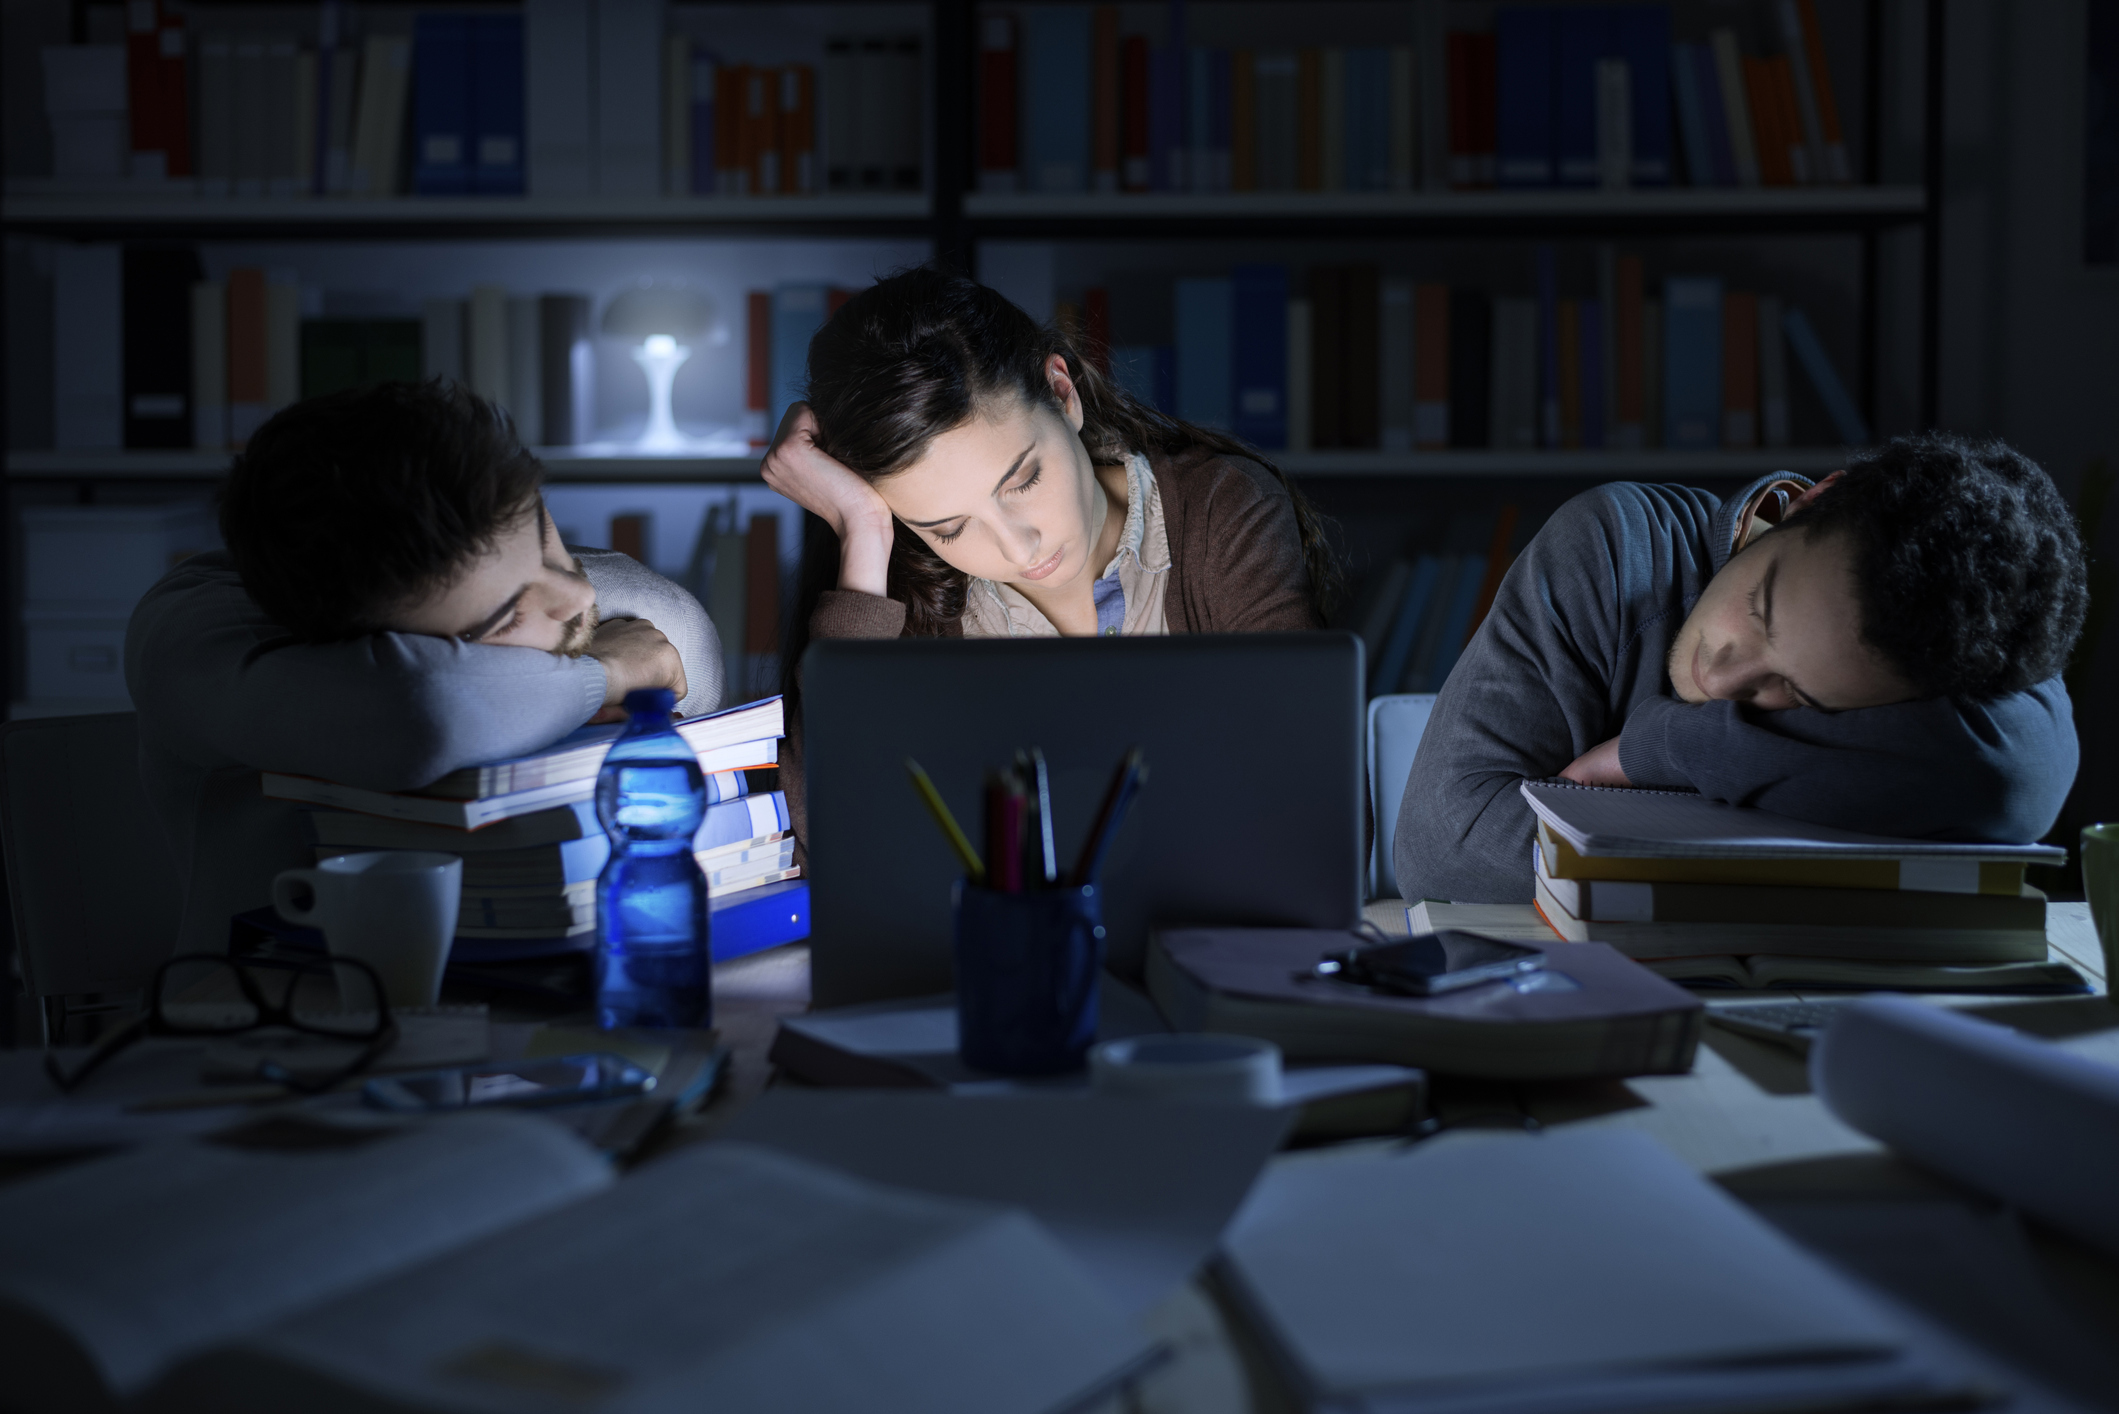 Tired students studying late at night, they are sleeping on the desktop and leaning on piles of books